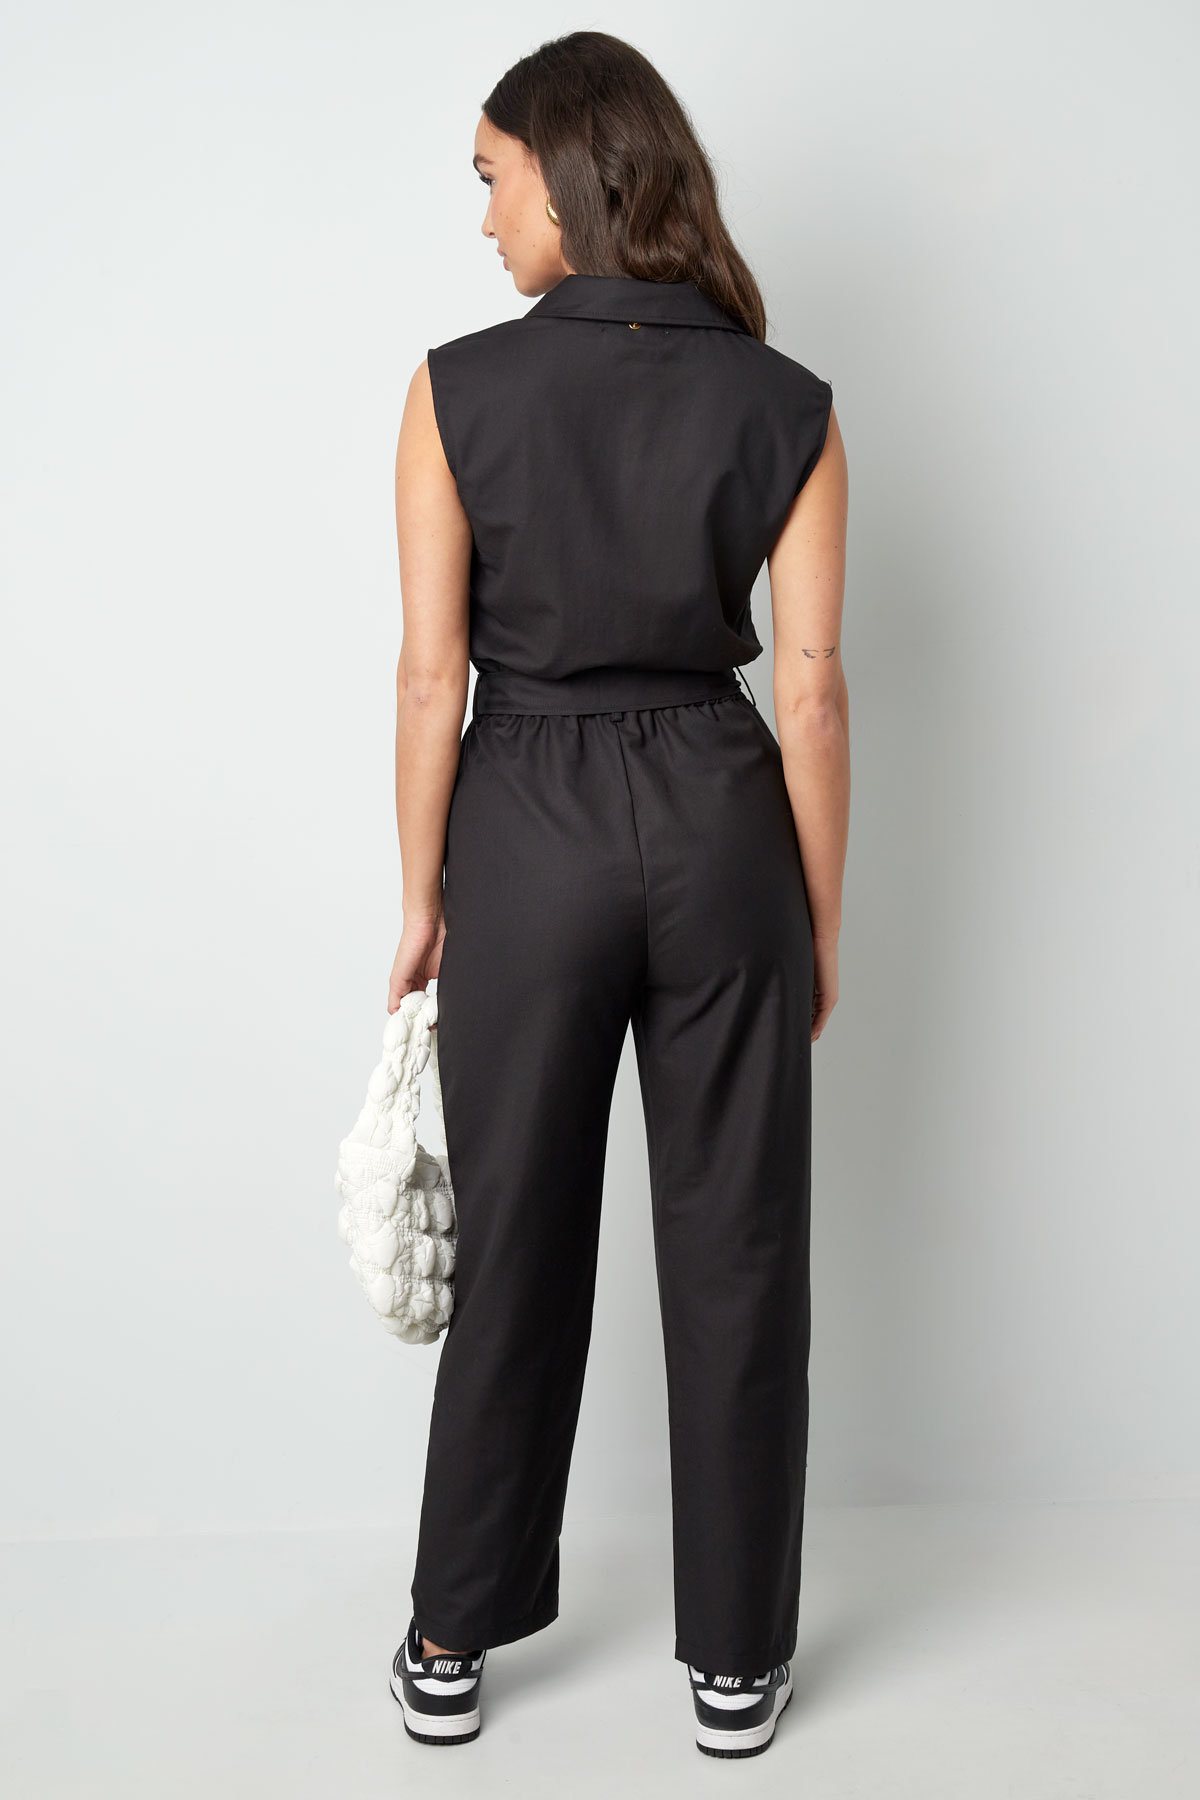 Jumpsuit sleeveless with pockets - black Picture8